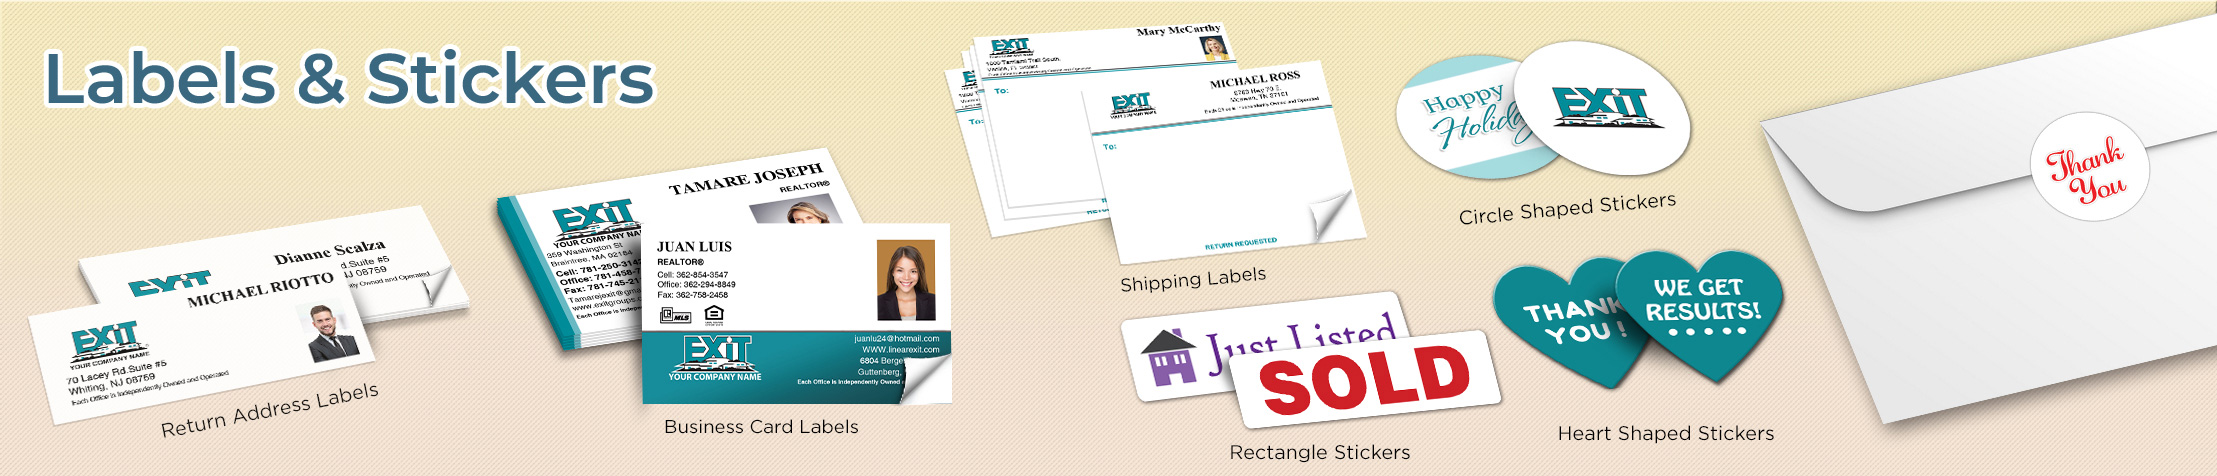 Exit Realty Real Estate Labels and Stickers - Exit Realty approved vendor business card labels, return address labels, shipping labels, and assorted stickers | BestPrintBuy.com